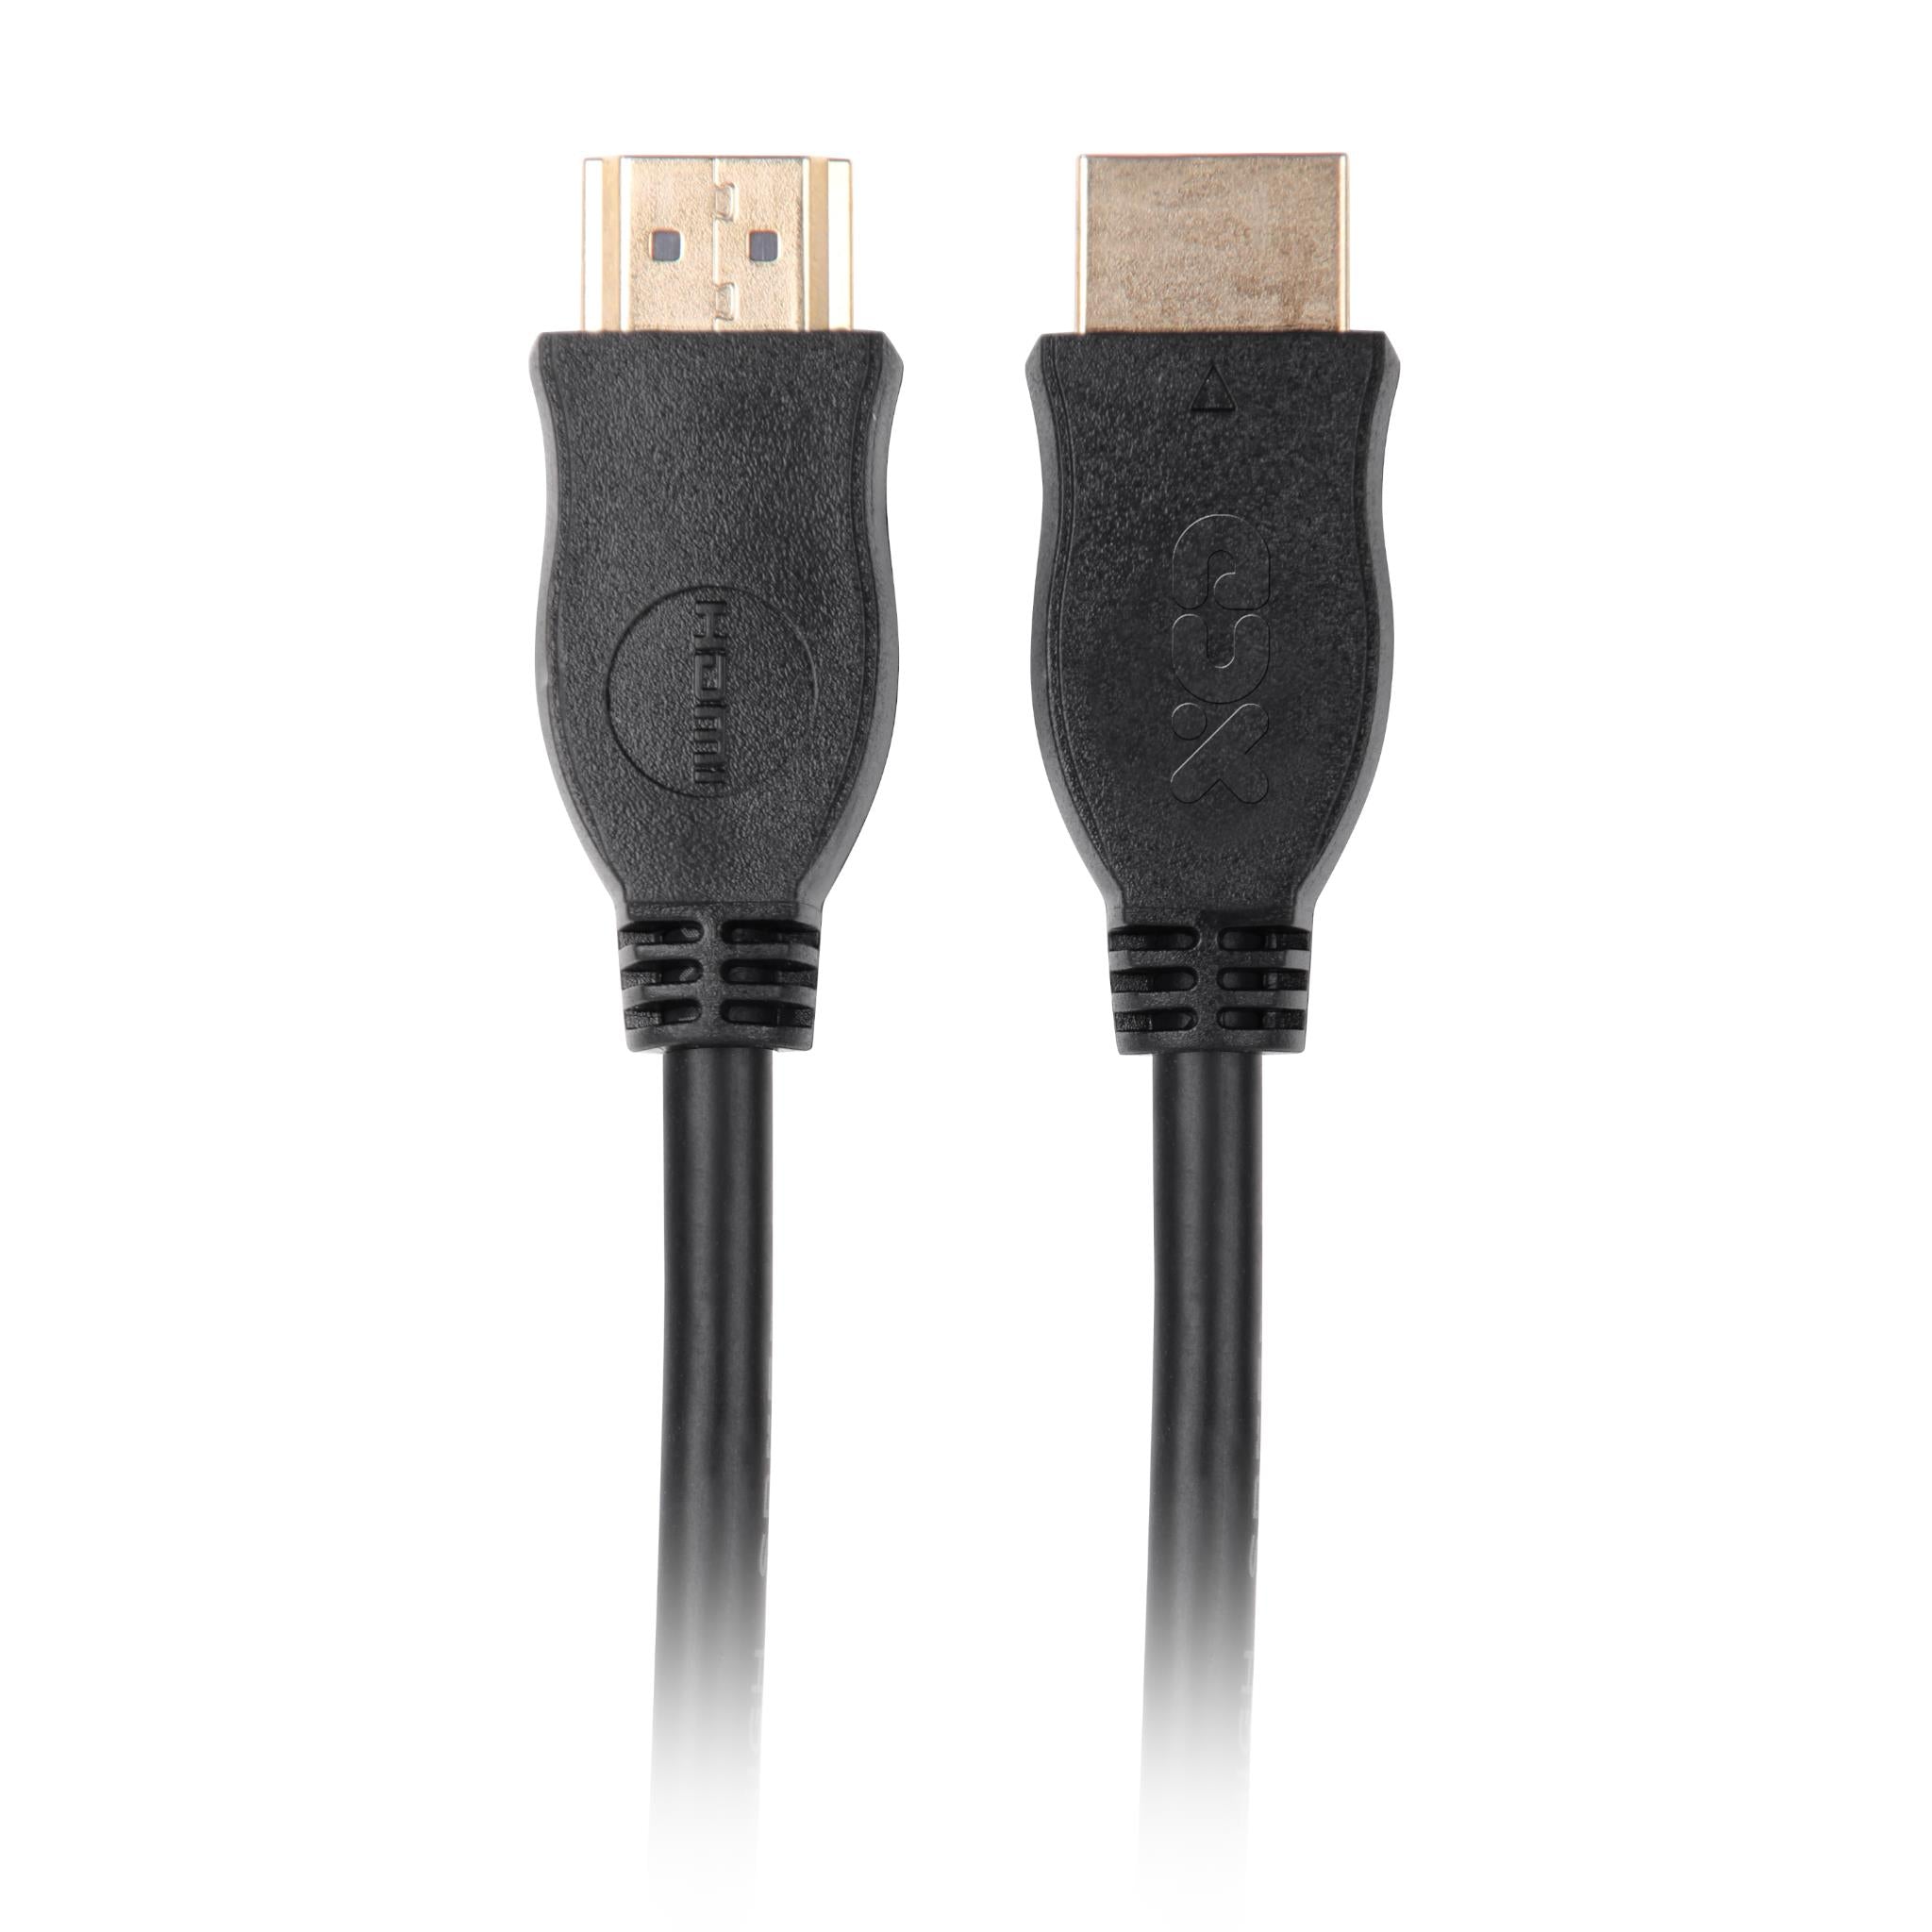 xcd essentials high speed hdmi cable with ethernet 4k 1m